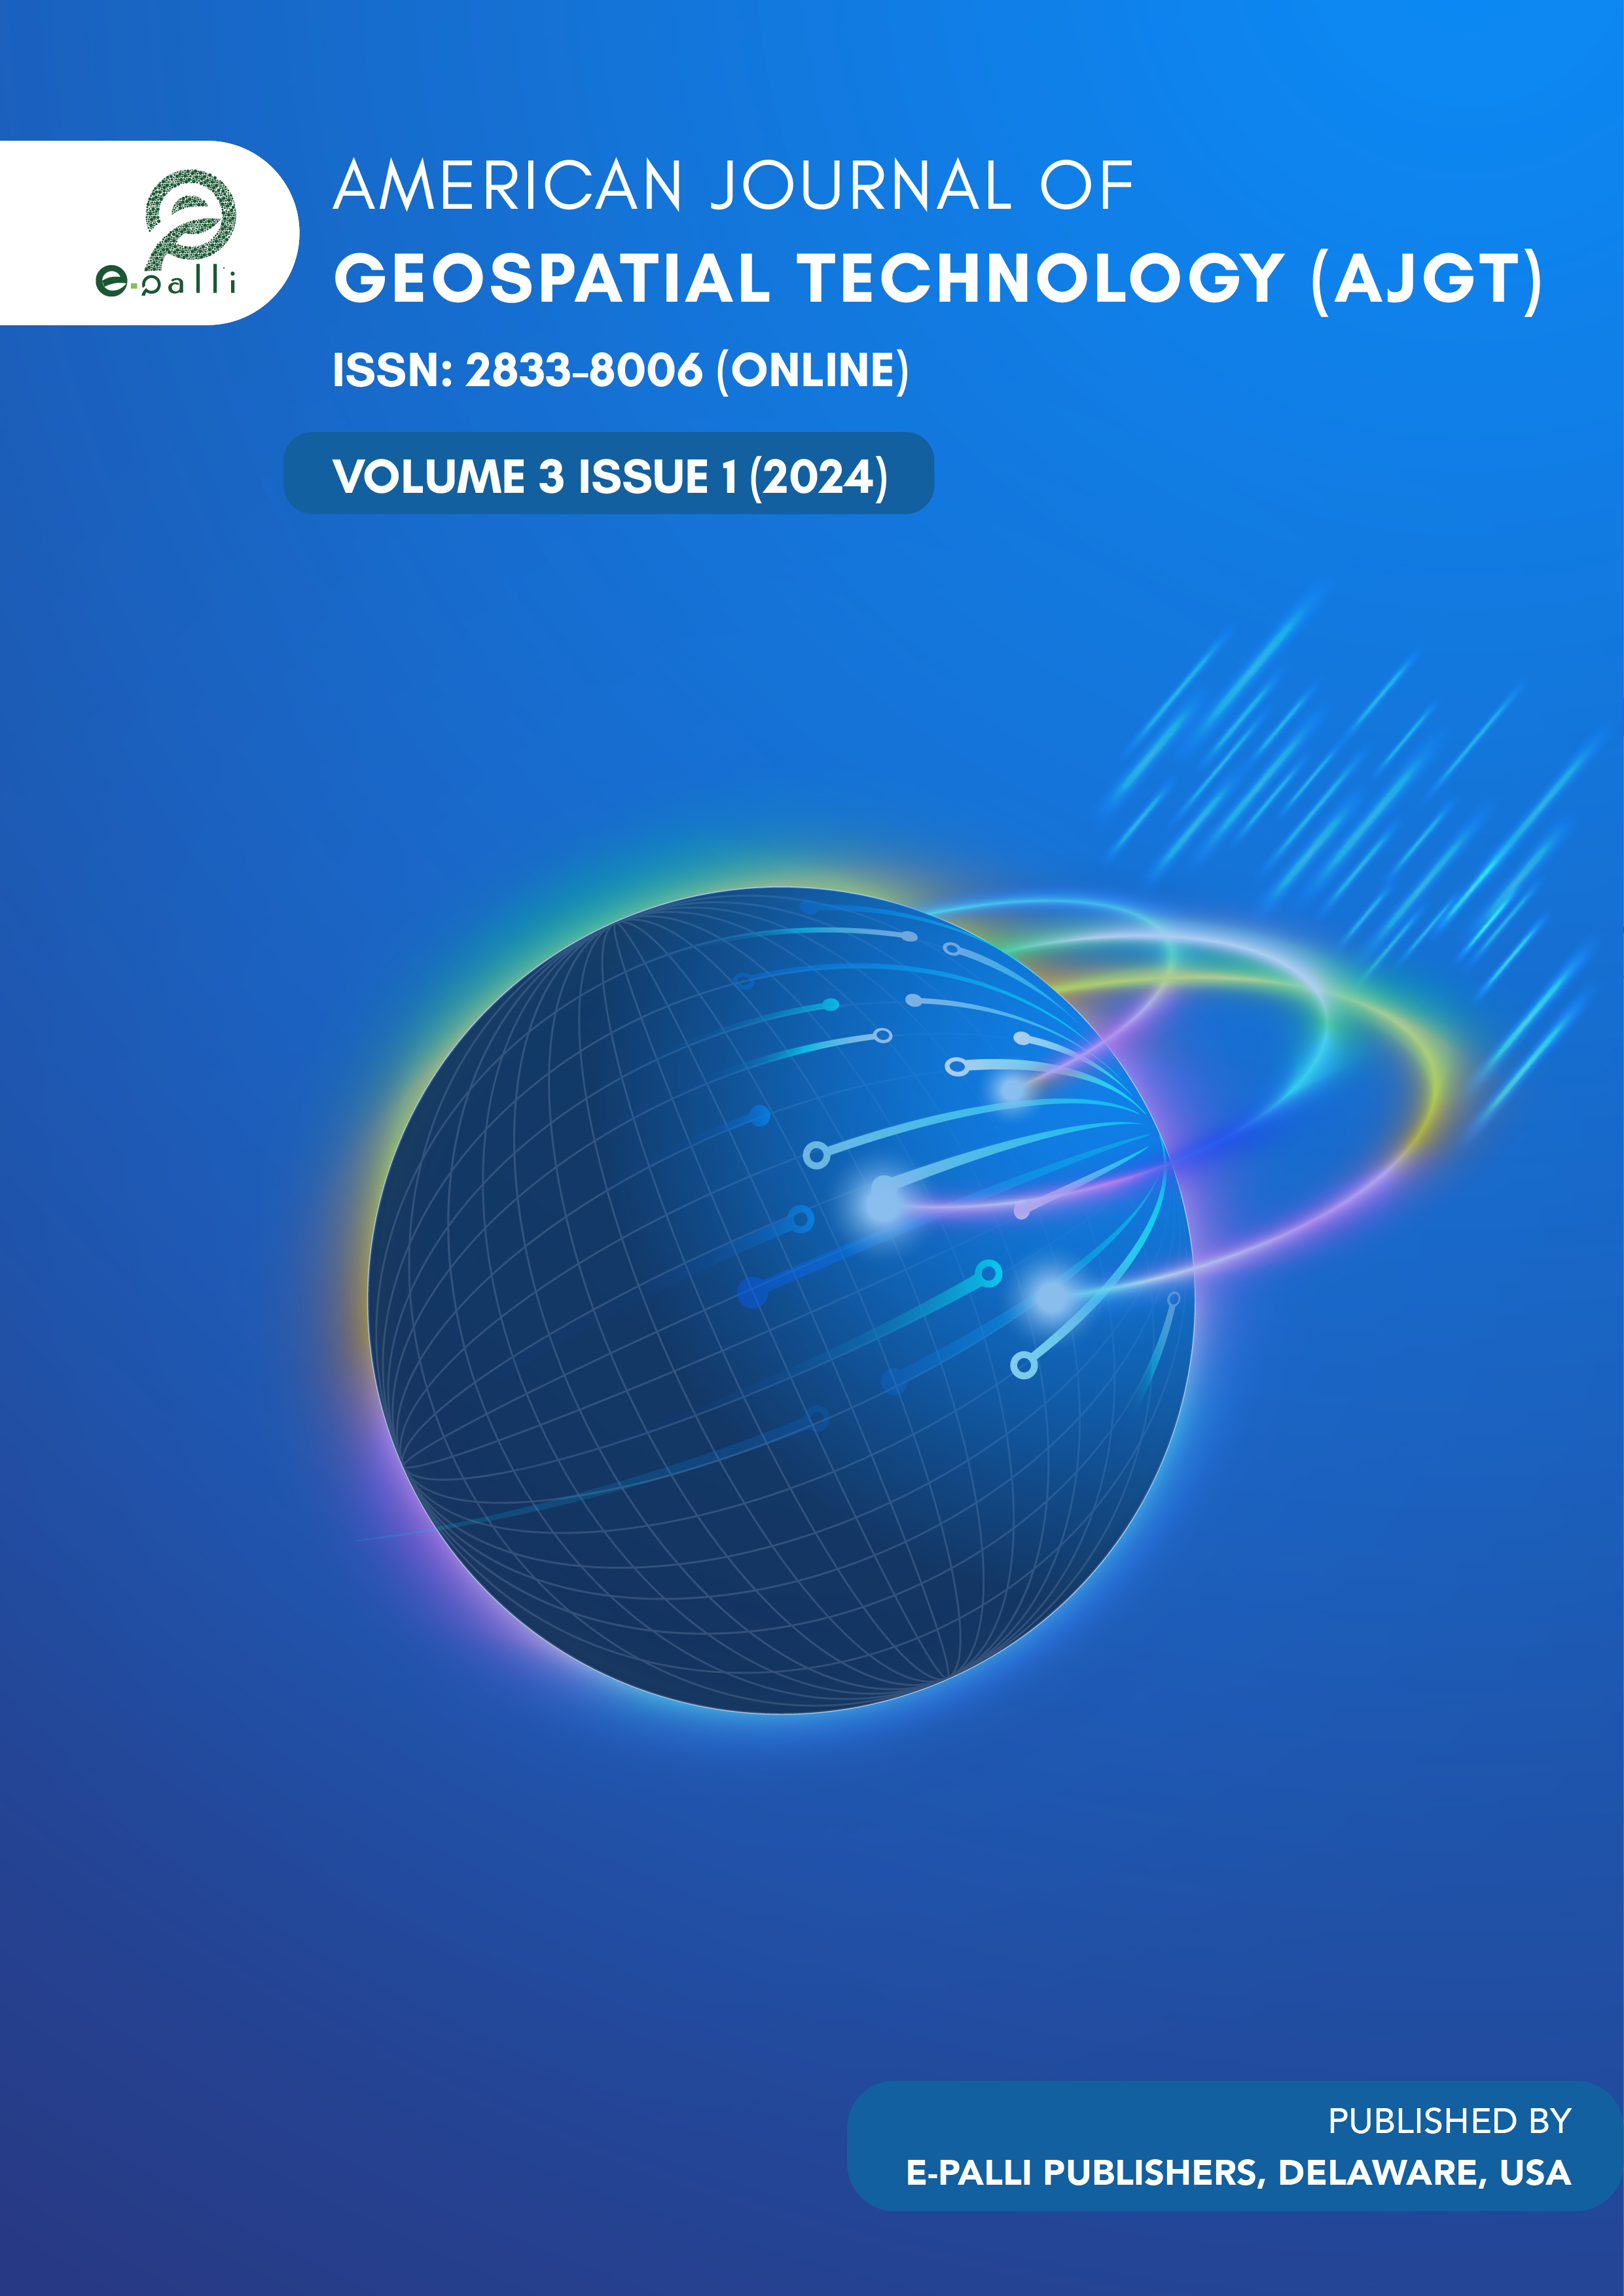 					View Vol. 3 No. 1 (2024): American Journal of Geospatial Technology
				